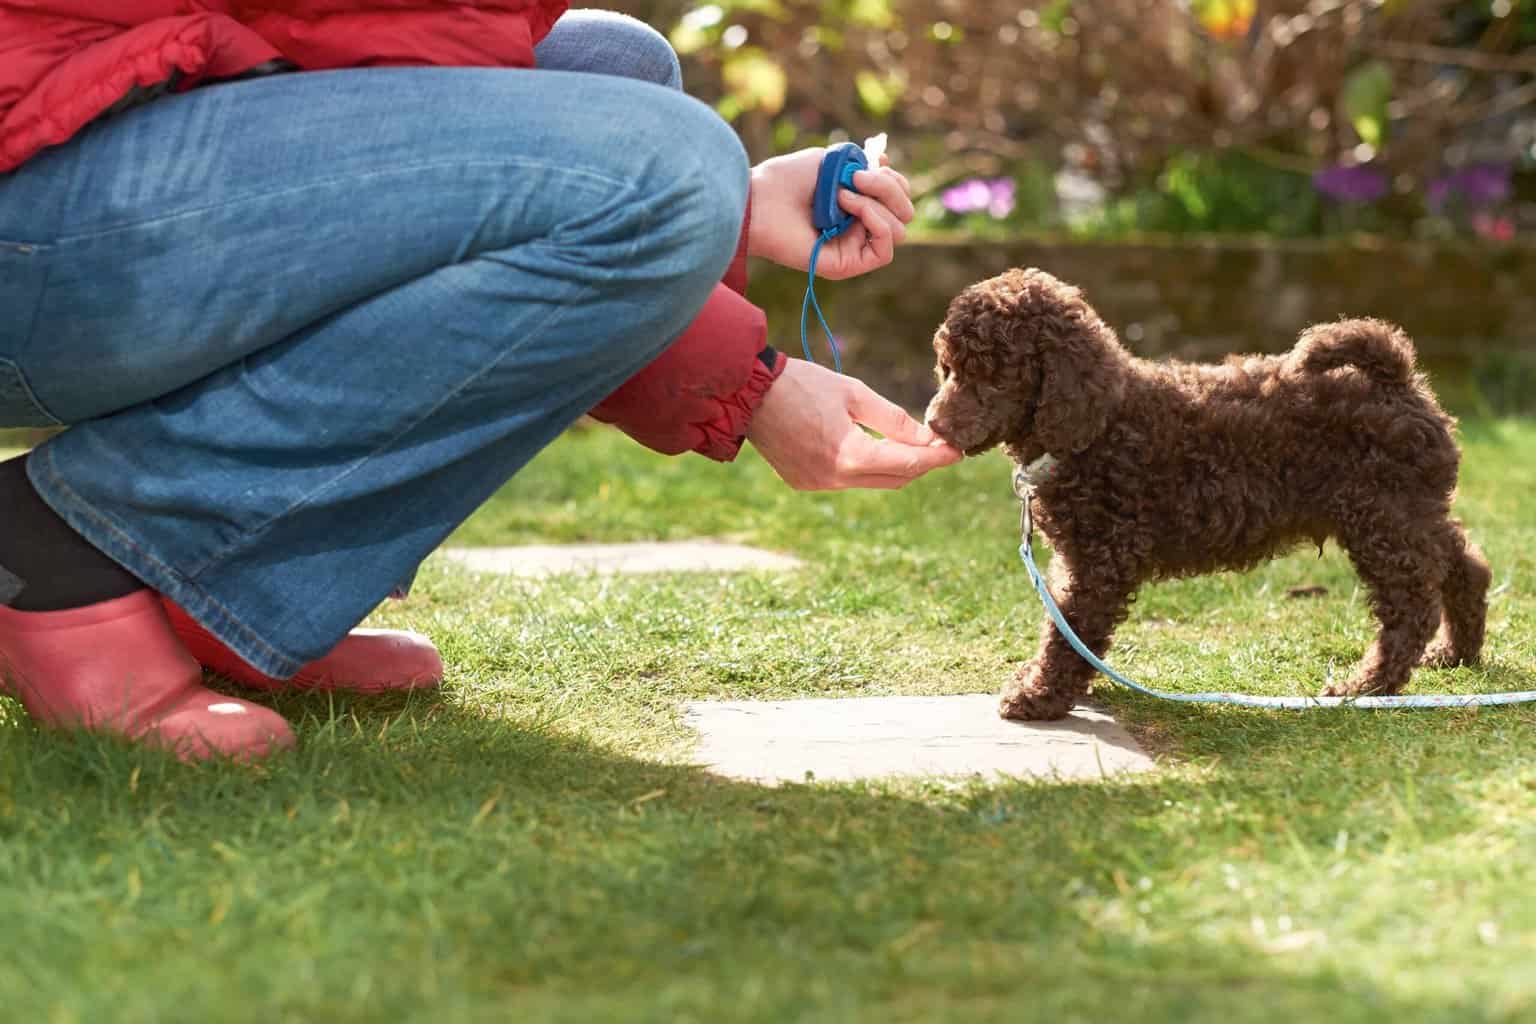 Woman rewards toy poodle for good behavior. Whenever your dog does something you like, mark it (say yes or click) and give them a treat.